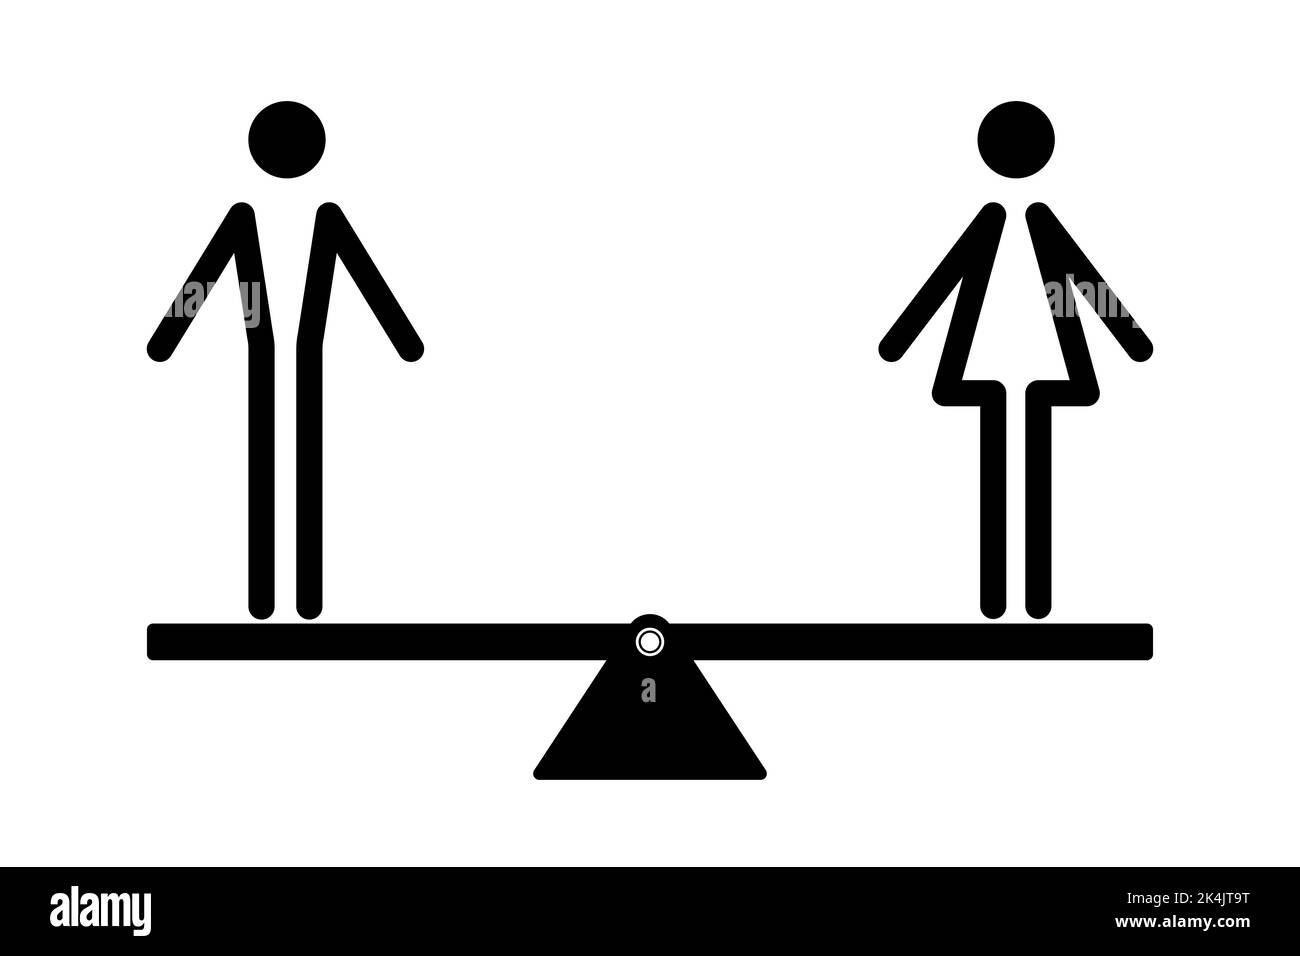 Gender equality concept. Man and woman icon on a seesaw. Vector illustration Stock Vector